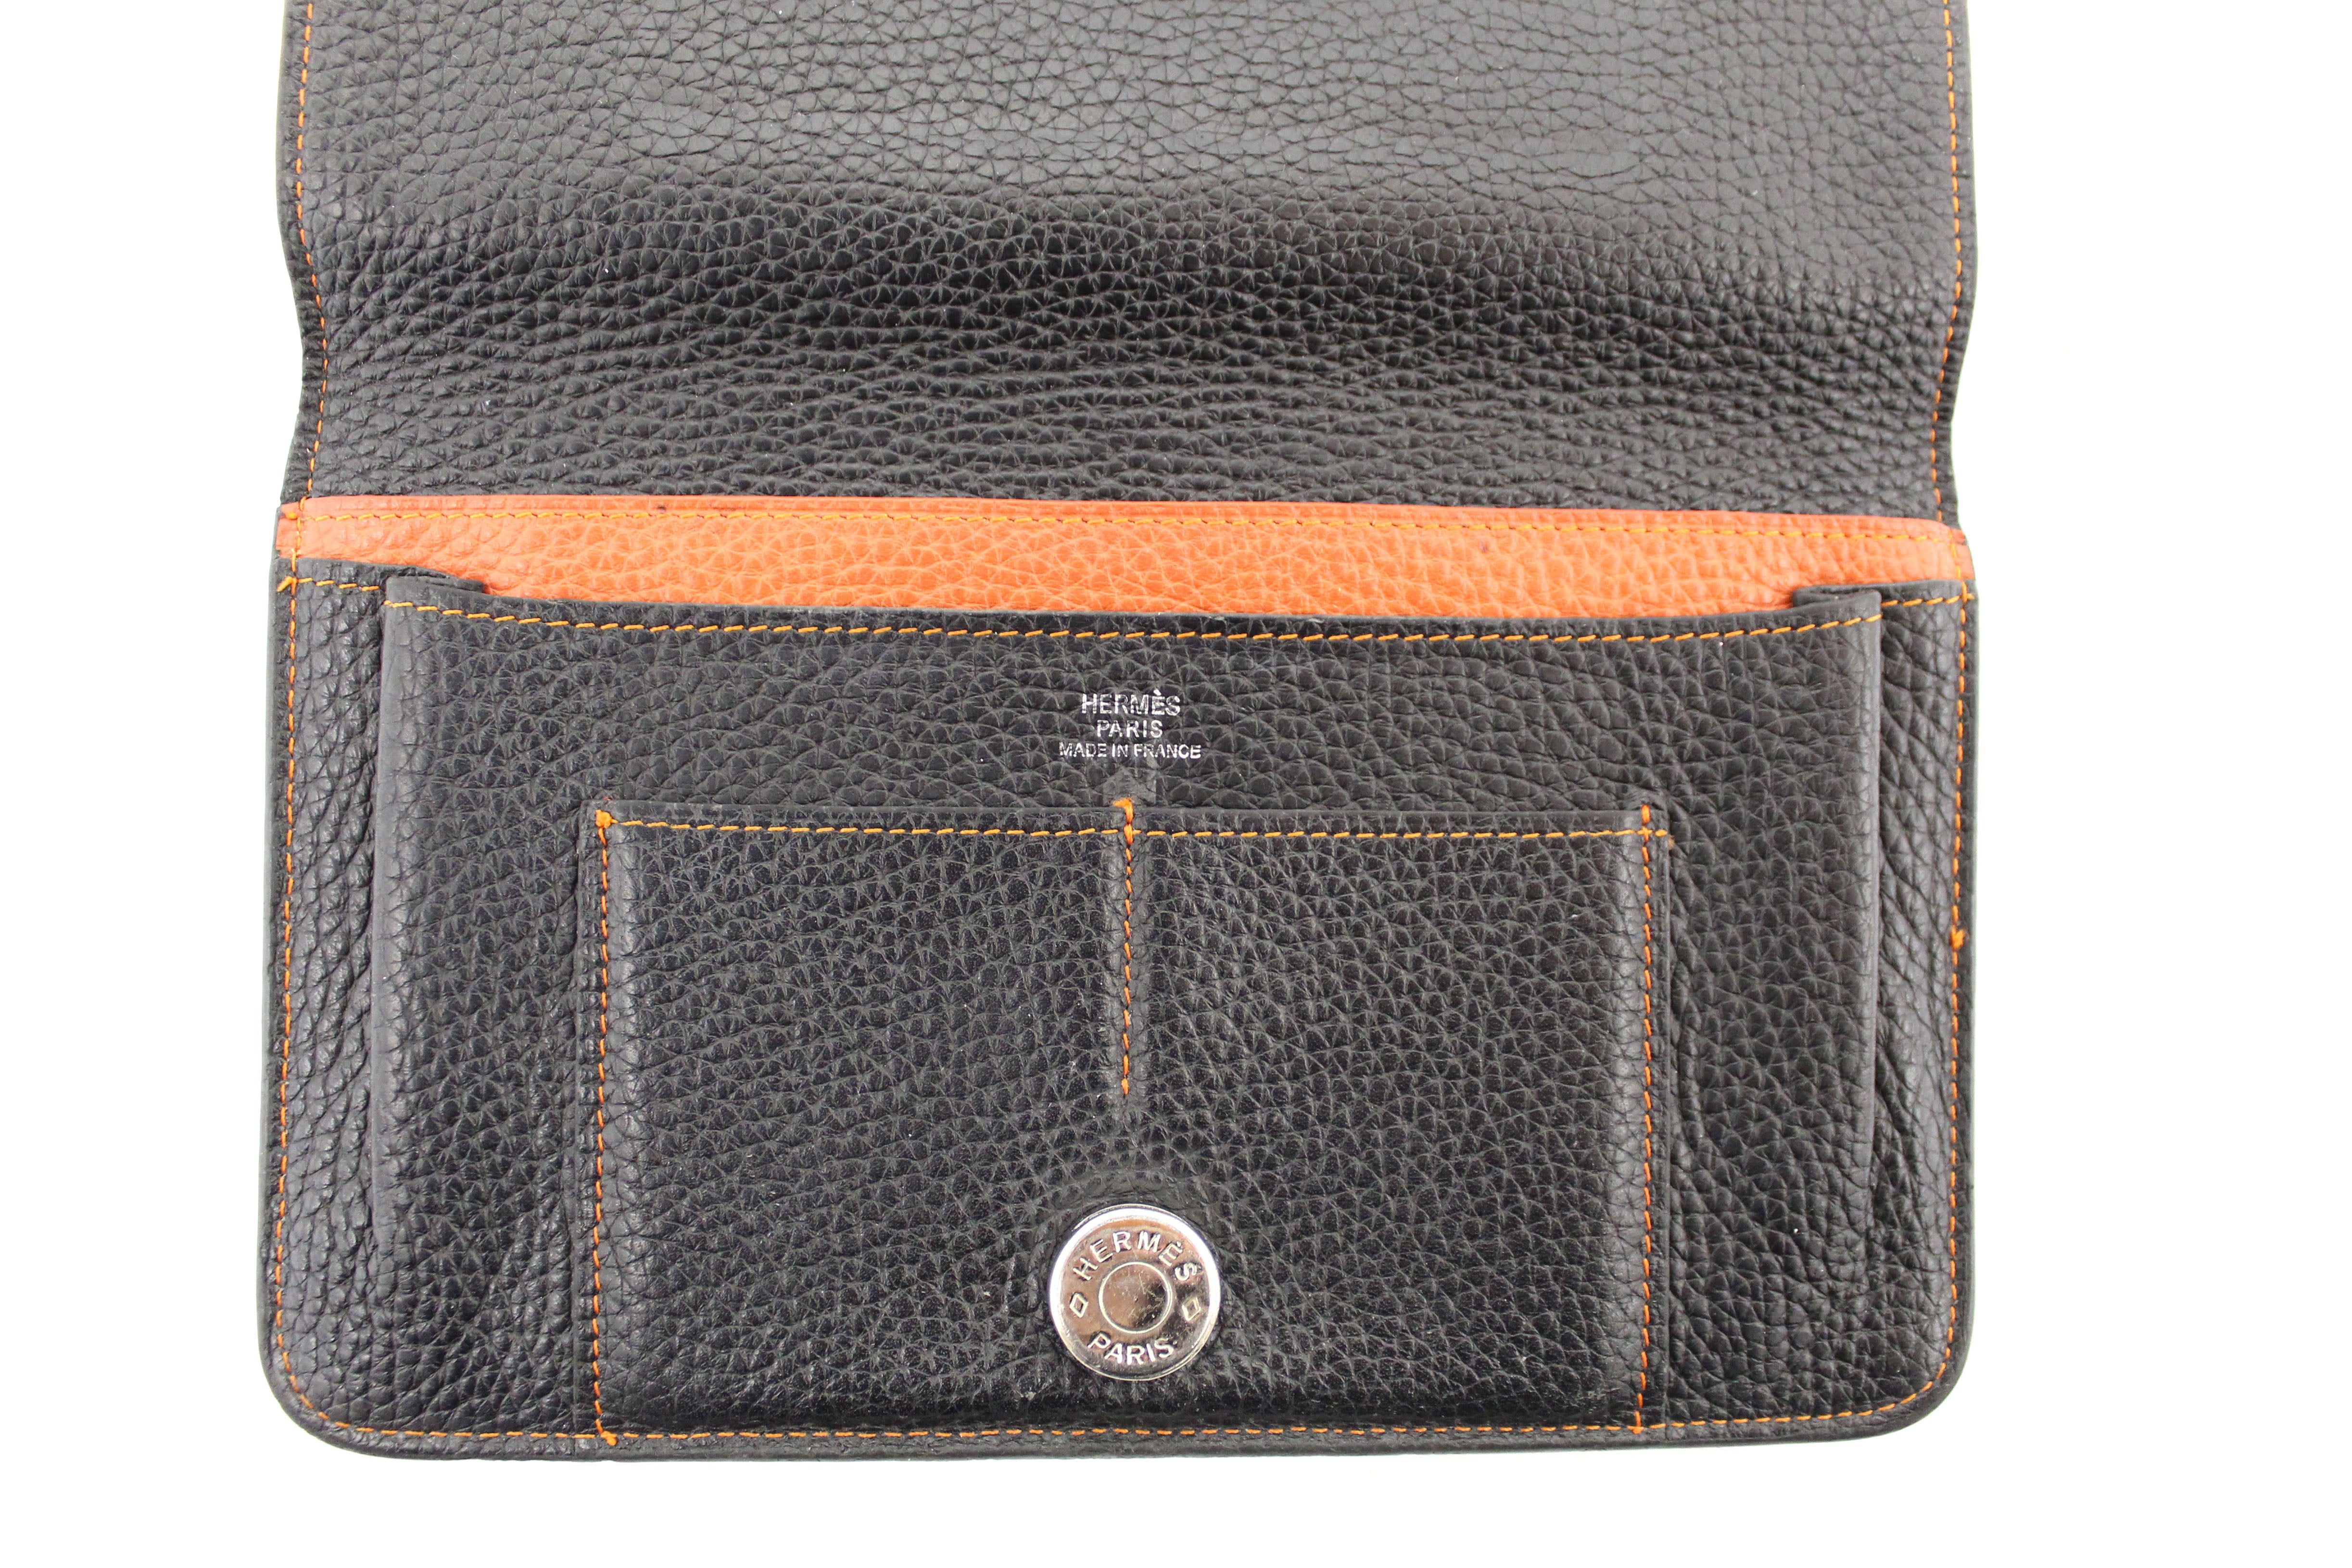 Authentic Hermes Dogon Bifold Long Wallet #17915